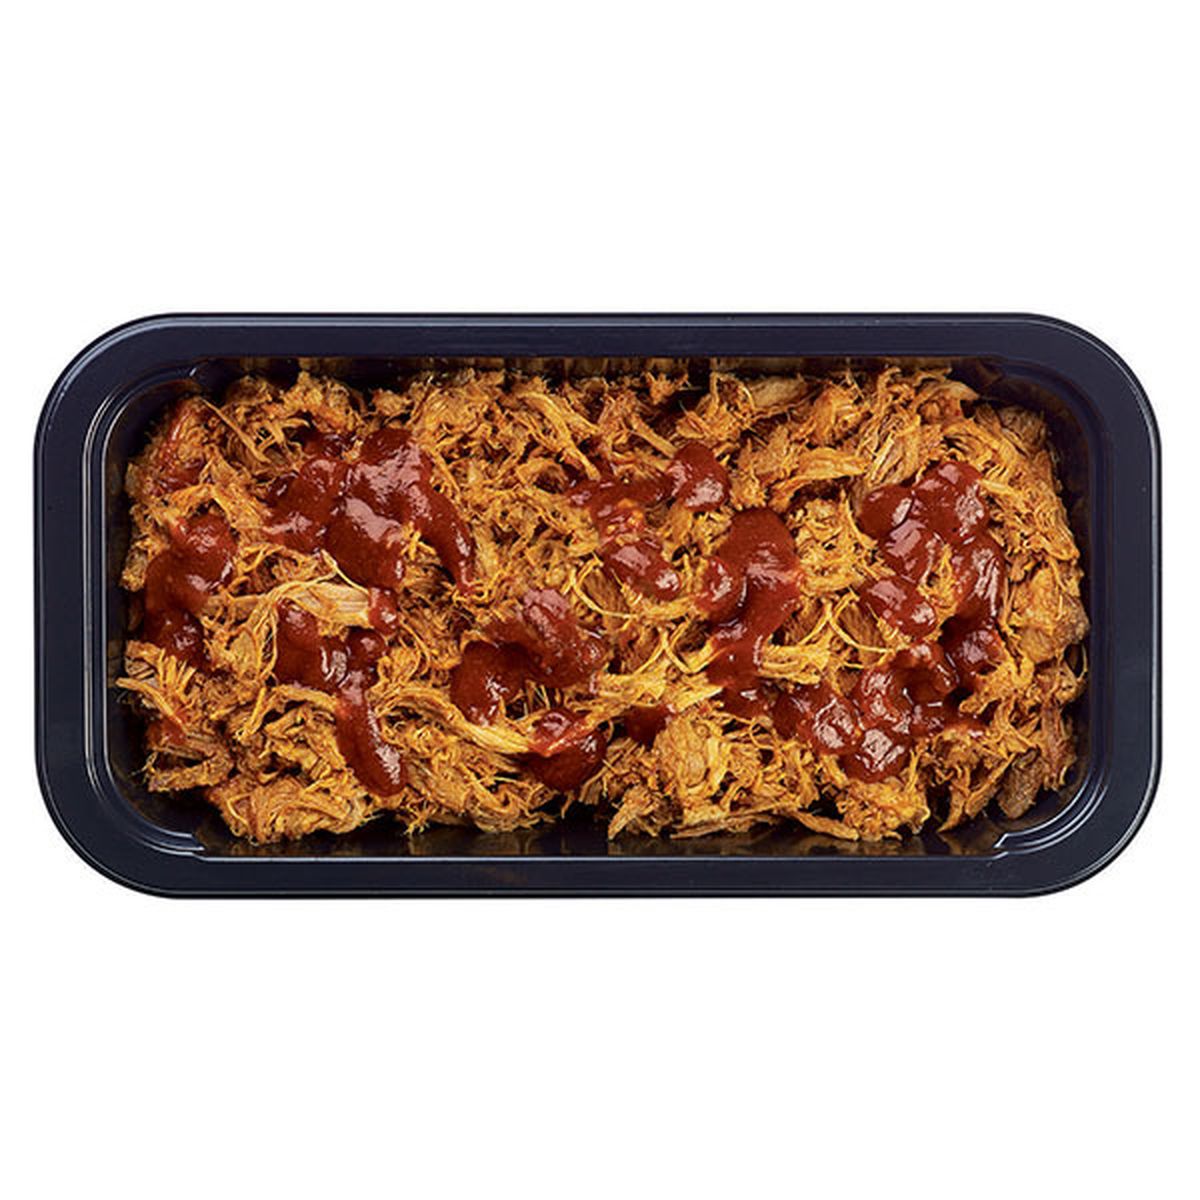 Calories in Wegmans BBQ Pulled Pork - Fully Cooked, FAMILY PACK